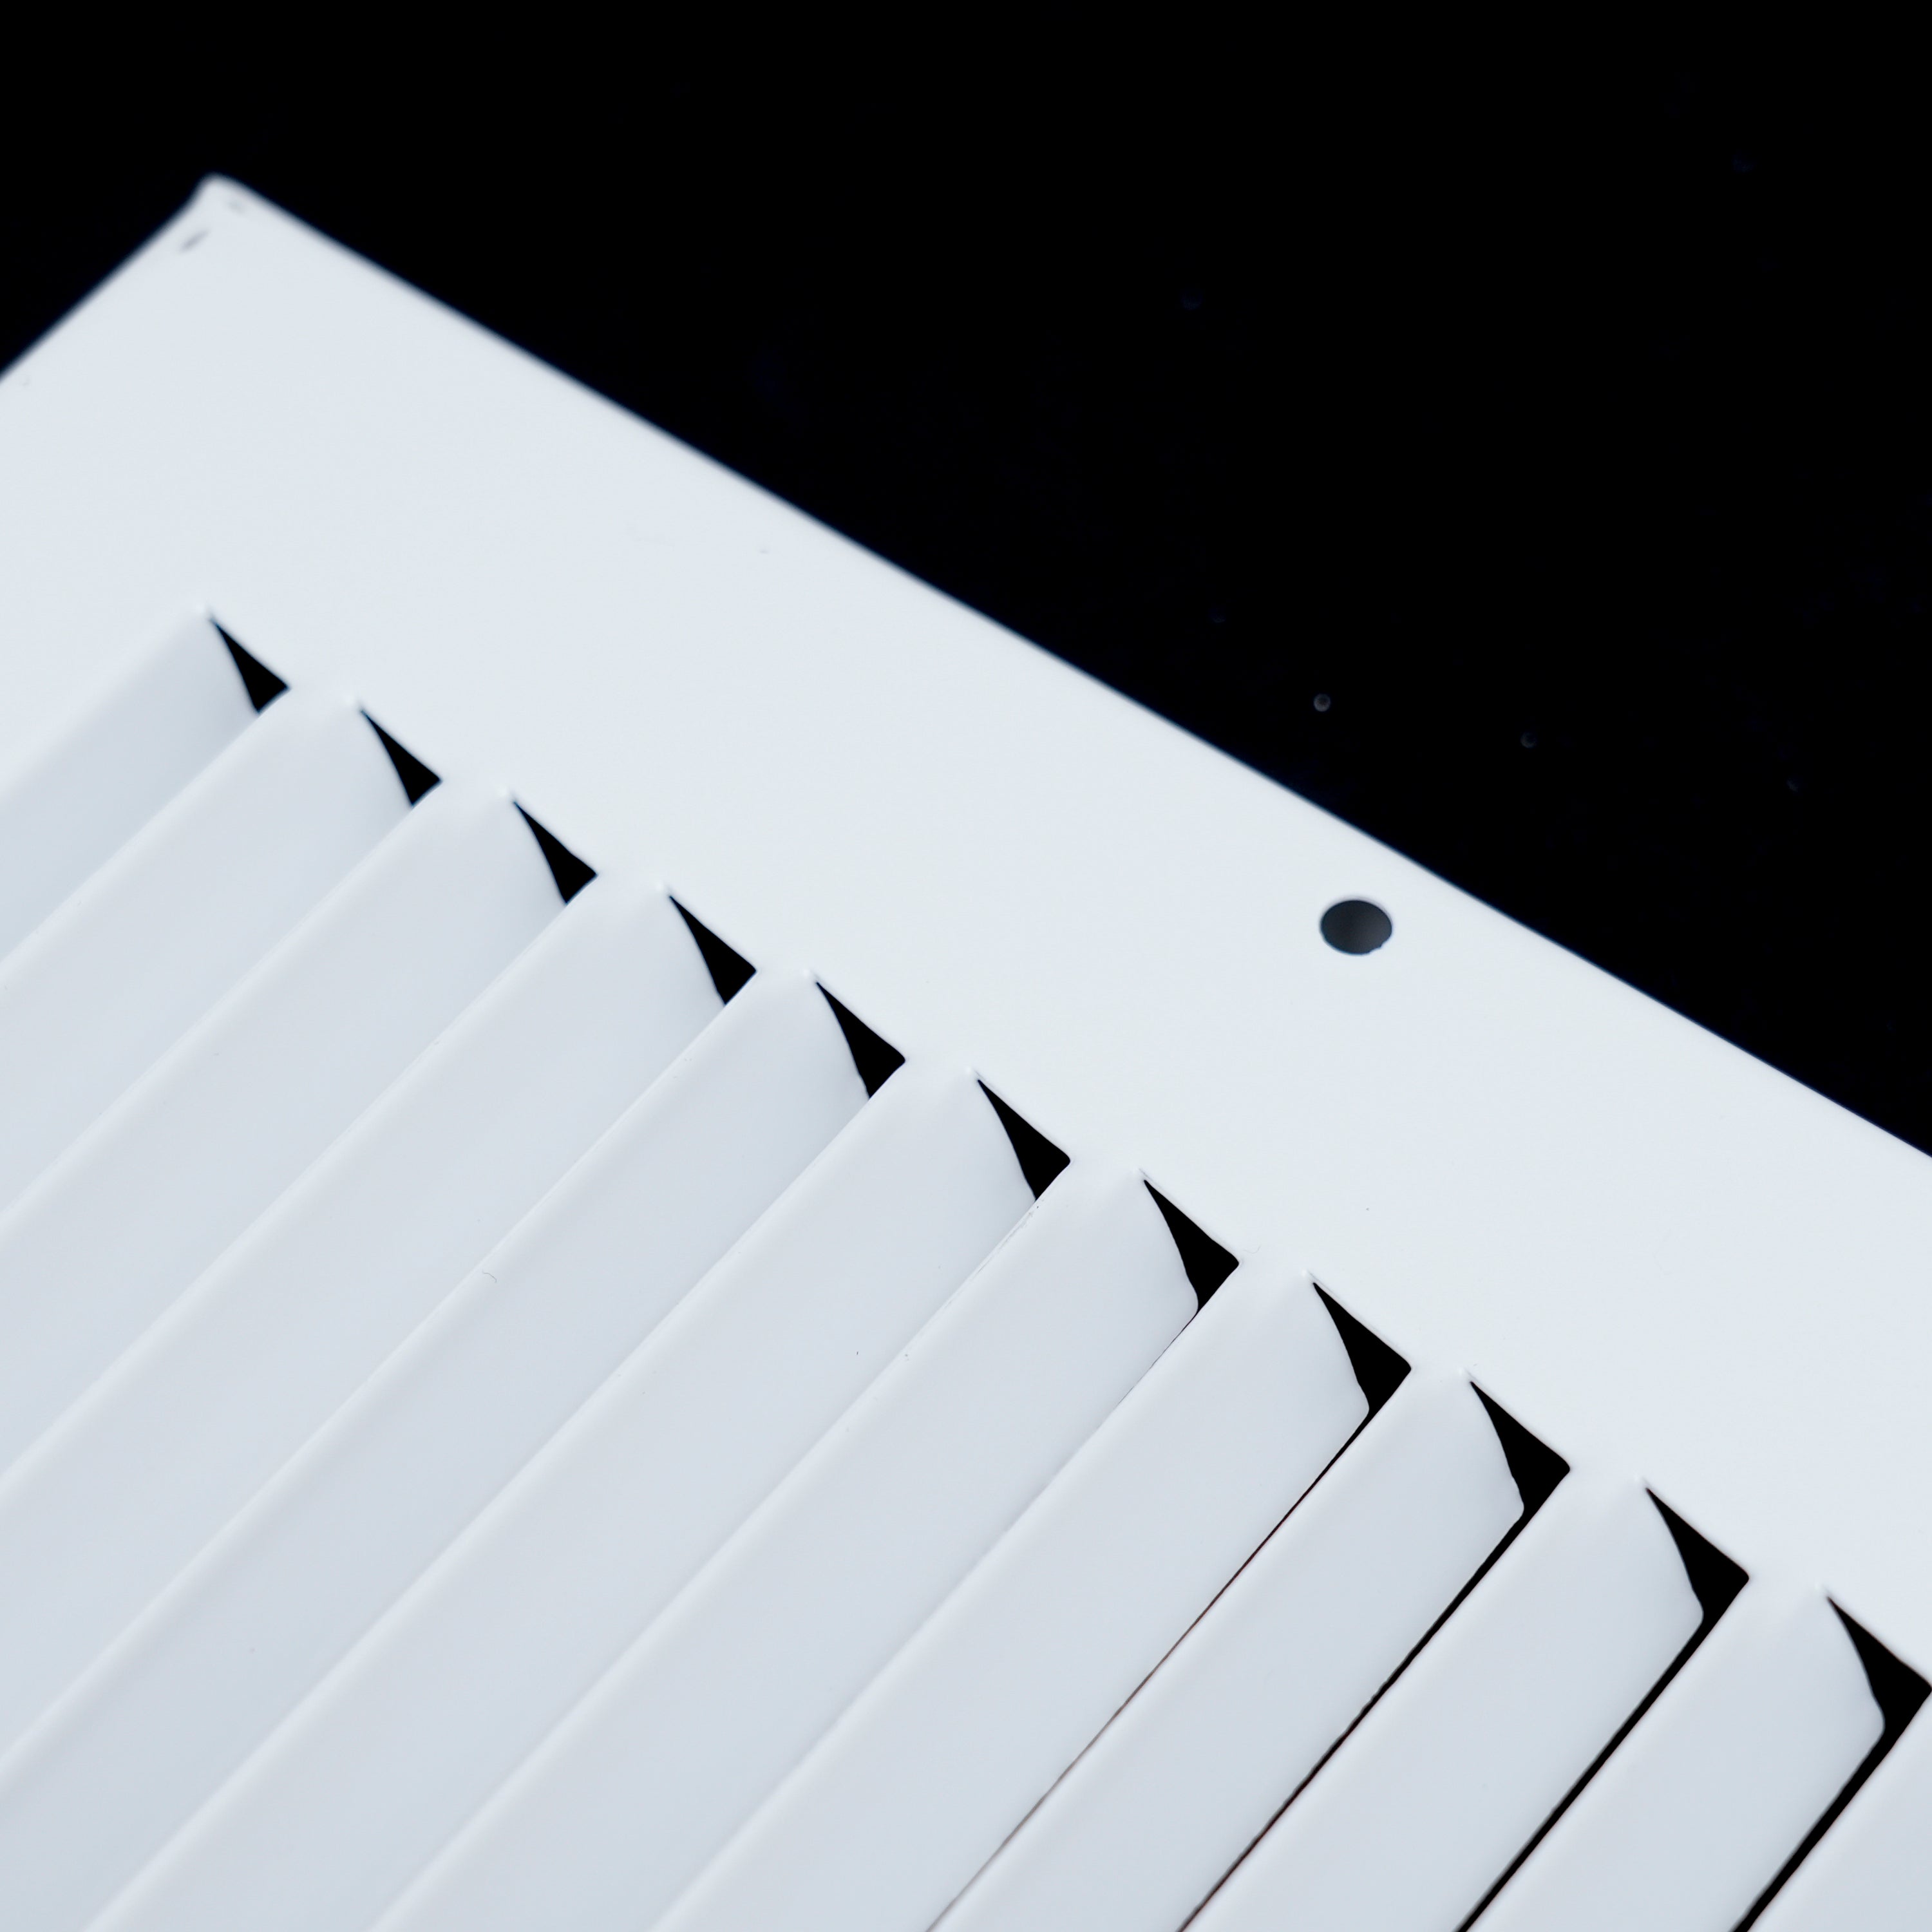 14"W x 6"H  Baseboard Return Air Grille | Vent Cover Grill | 7/8" Margin Turnback to Fit Baseboard | White | Outer Dimensions: 15.75"W X 7.75"H for 14x6 Duct Opening